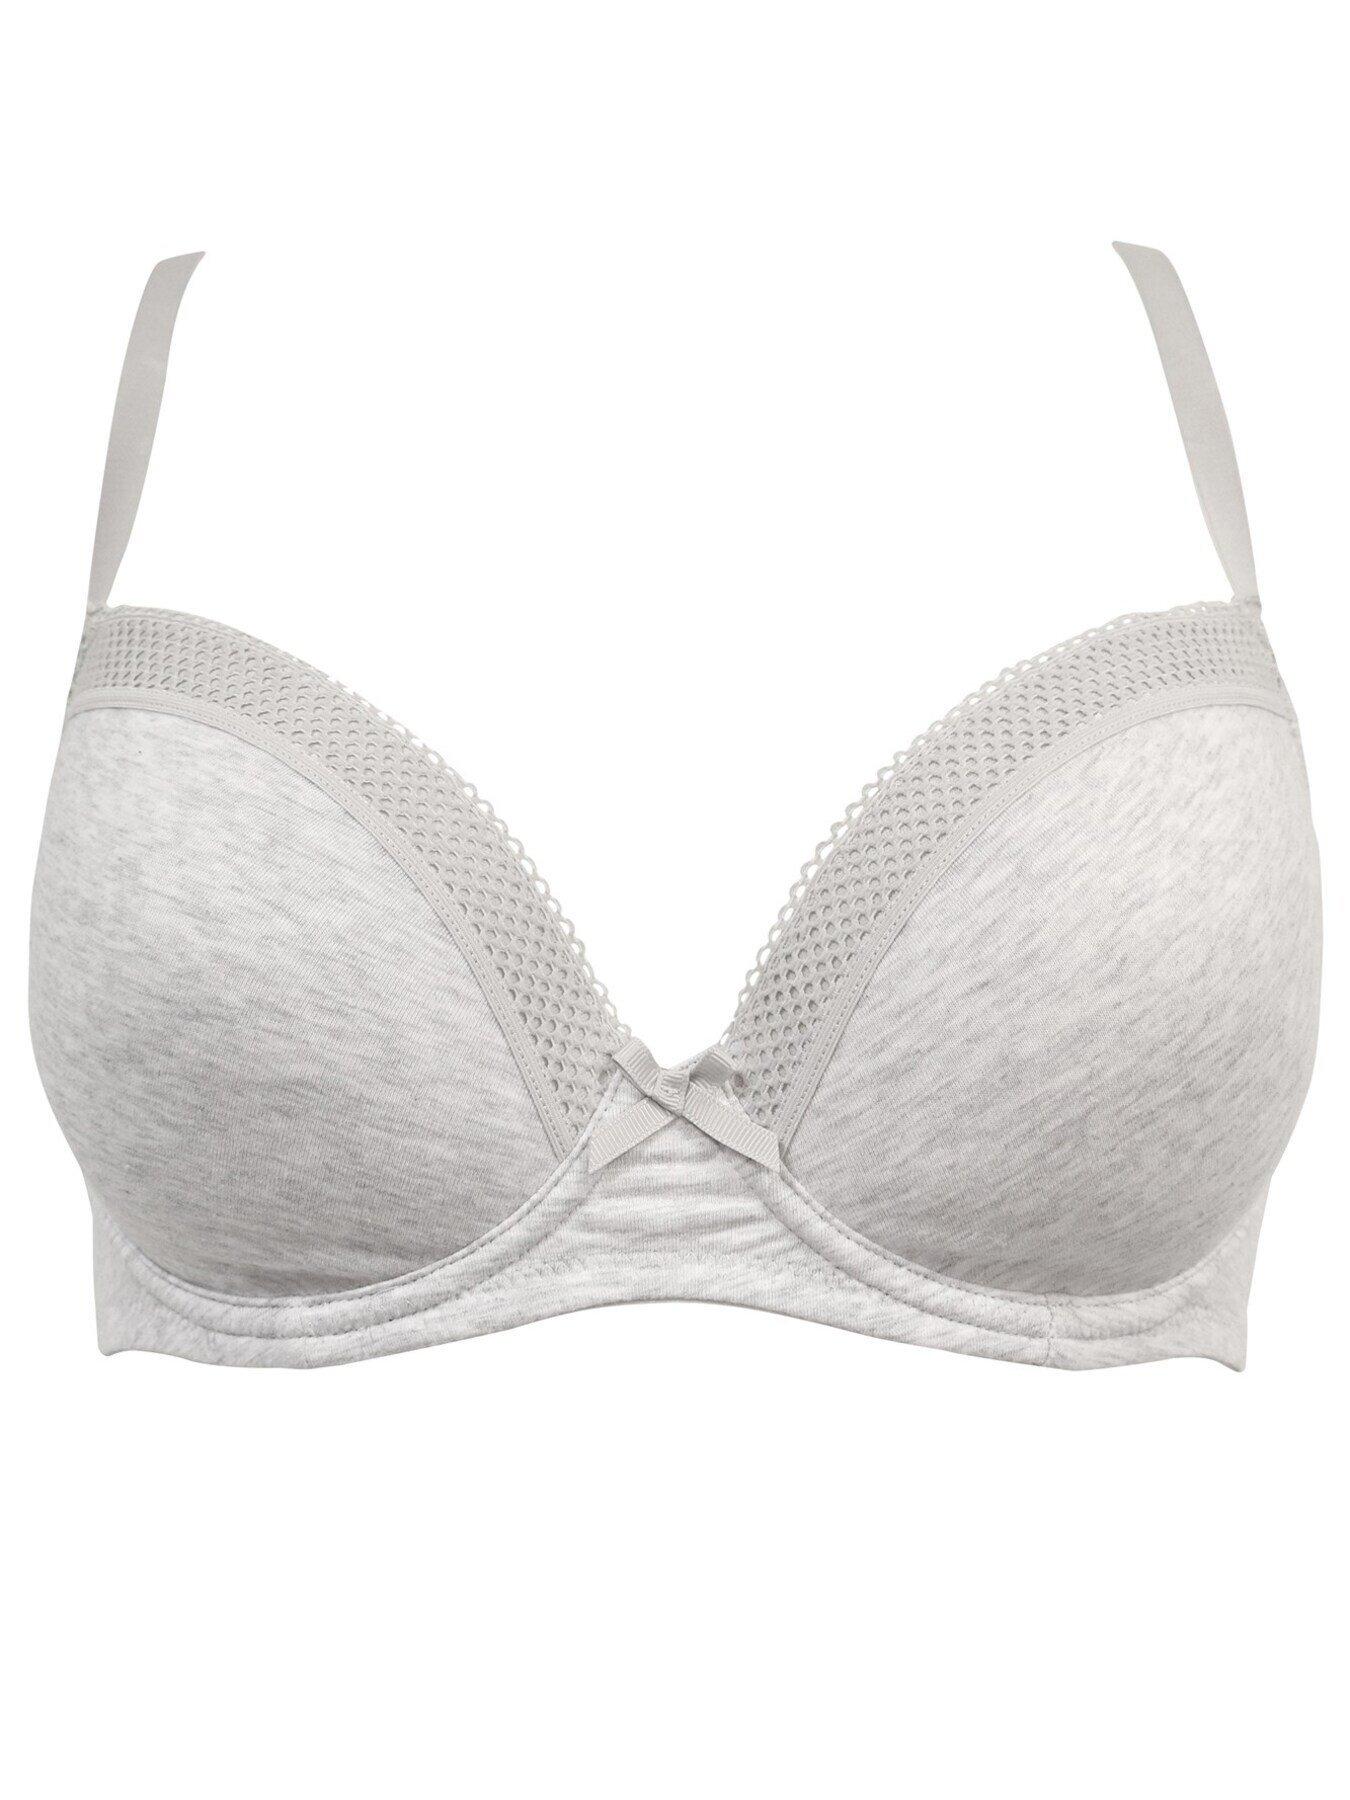 Pour Moi Love To Lounge Cotton Non Wired Bra Grey Marl – Brastop UK